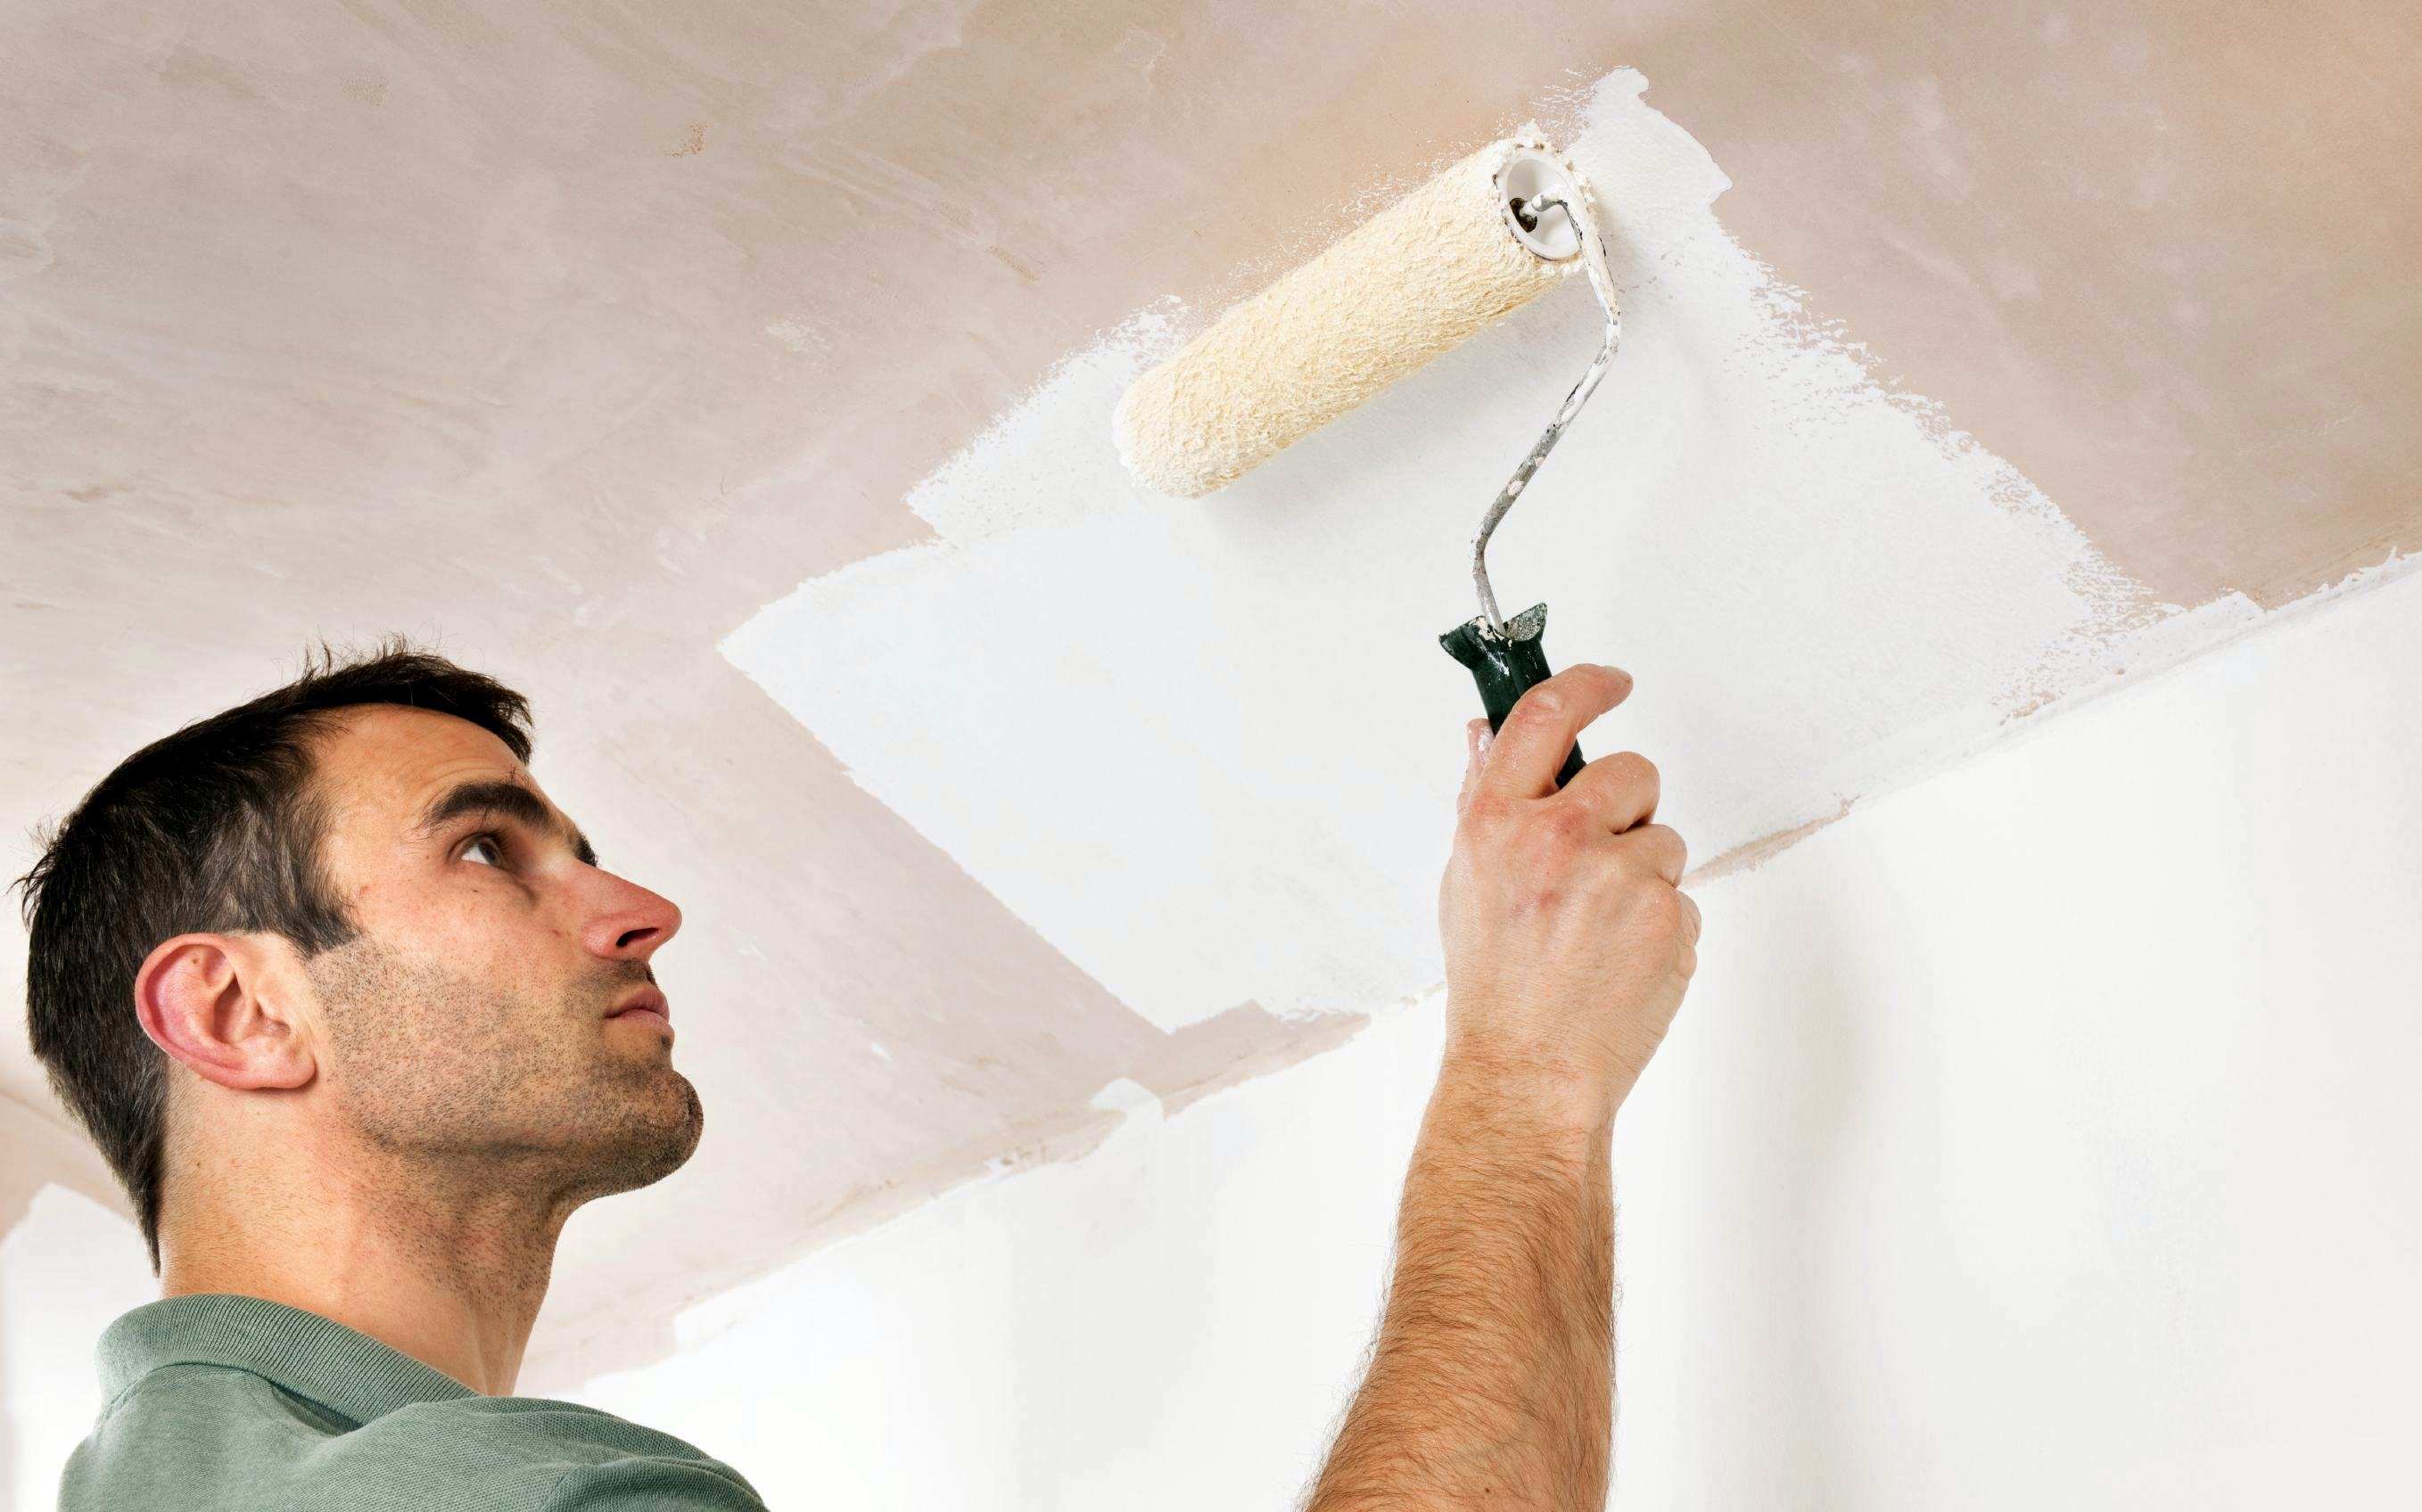 Plaster Ceiling How To Properly Plaster Their Own Hands Methods And Technology Of Application